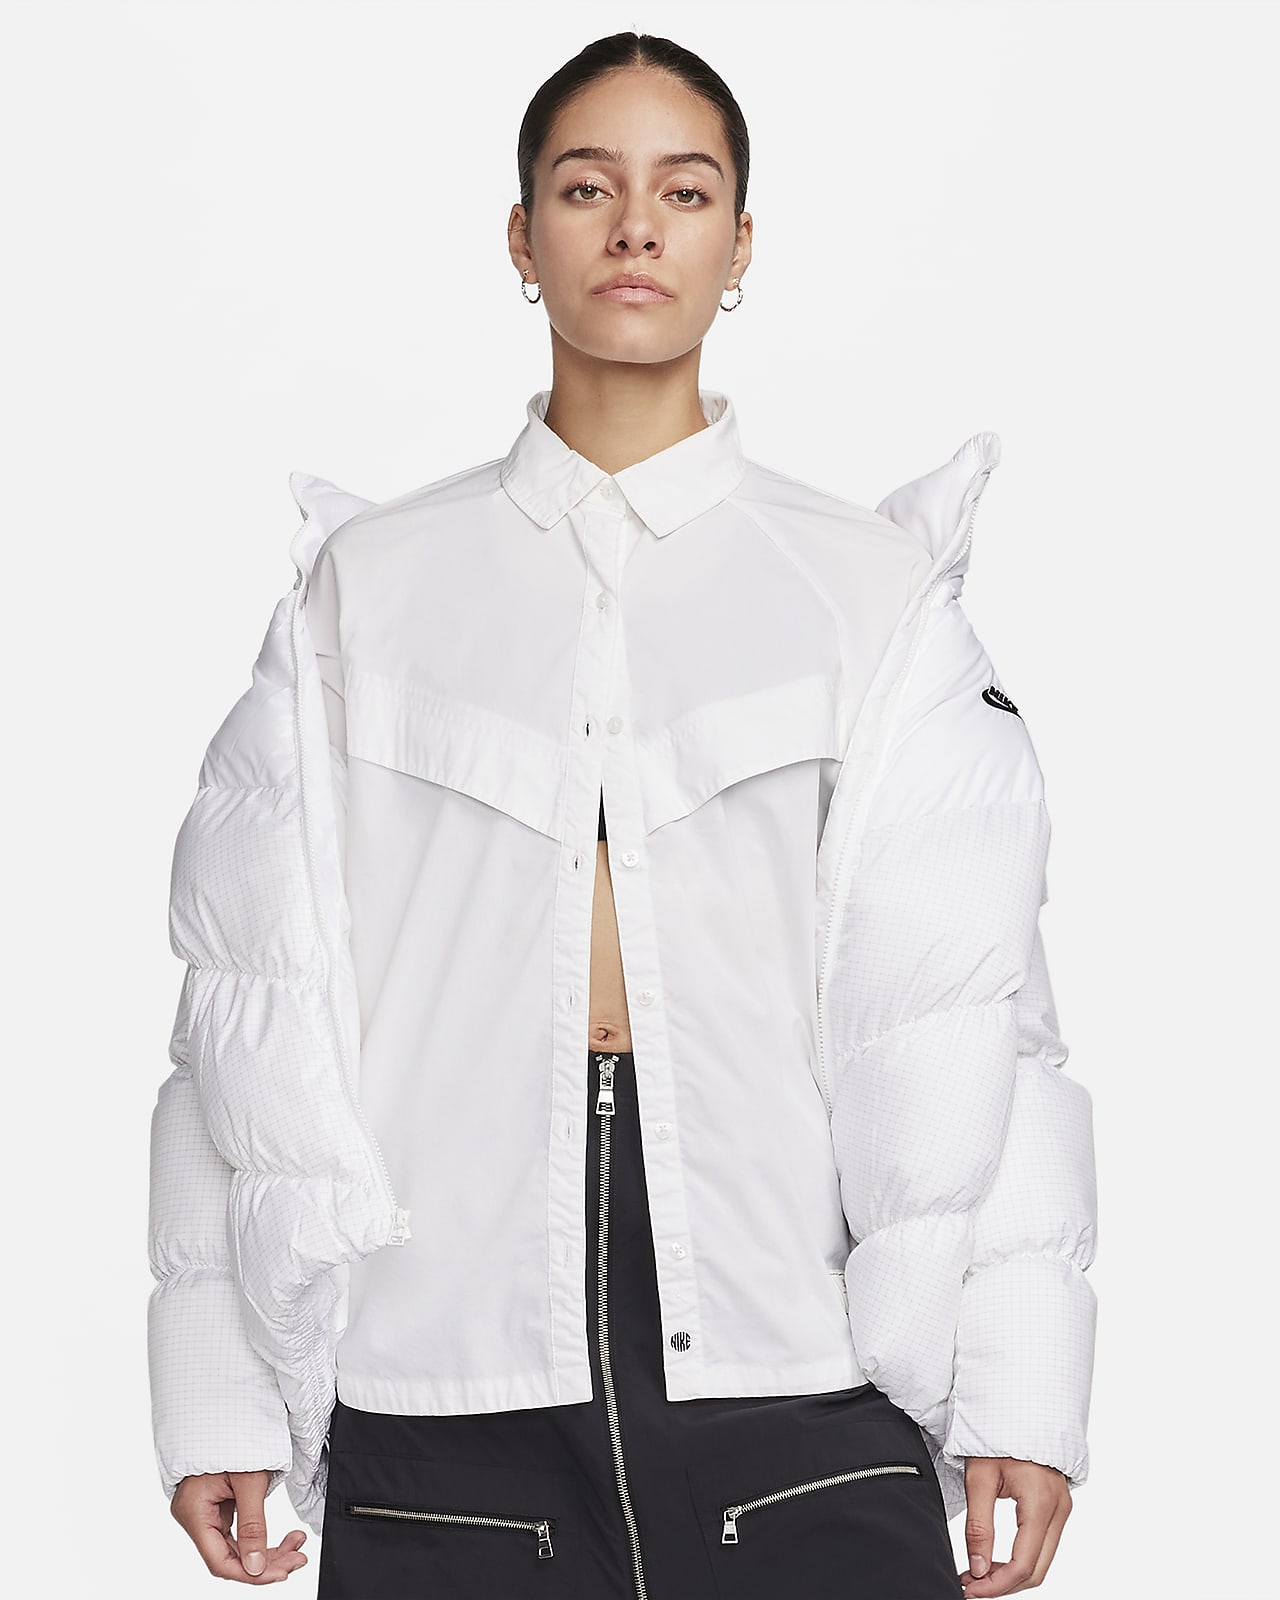 Nike Sportswear Windrunner Therma-FIT Midweight Puffer Jacket Black/Bl